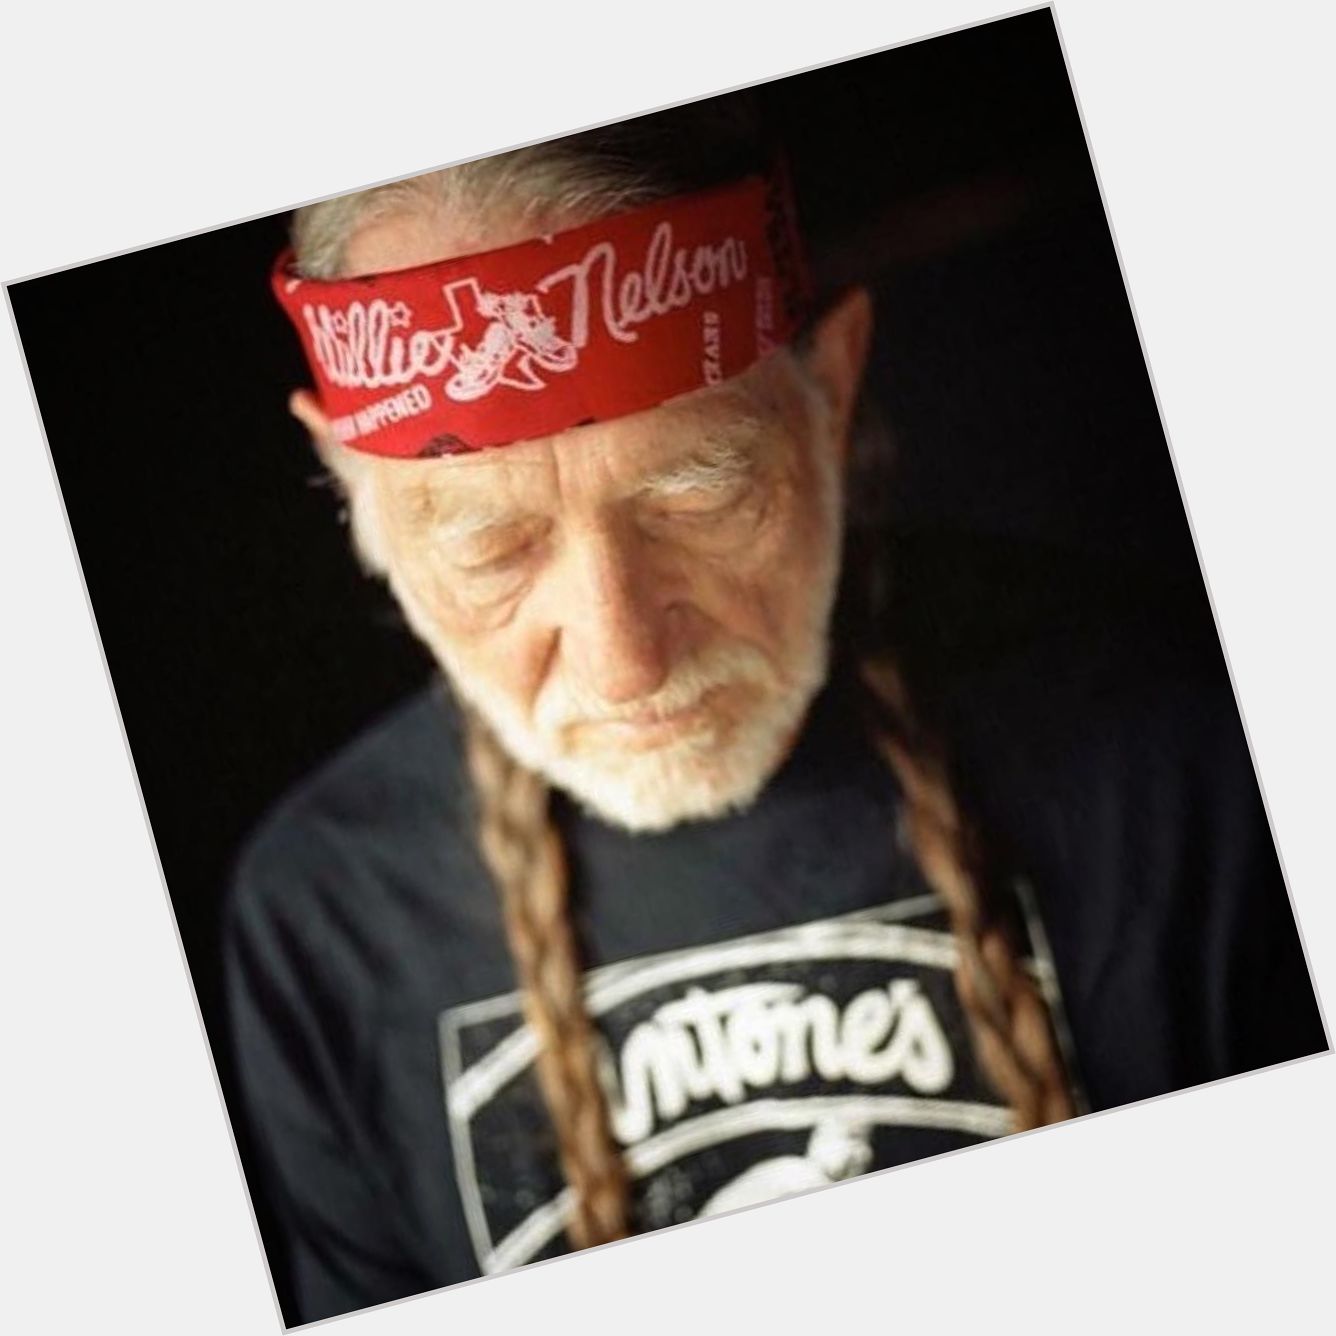 Wishing a happy birthday to the great Willie Nelson! 